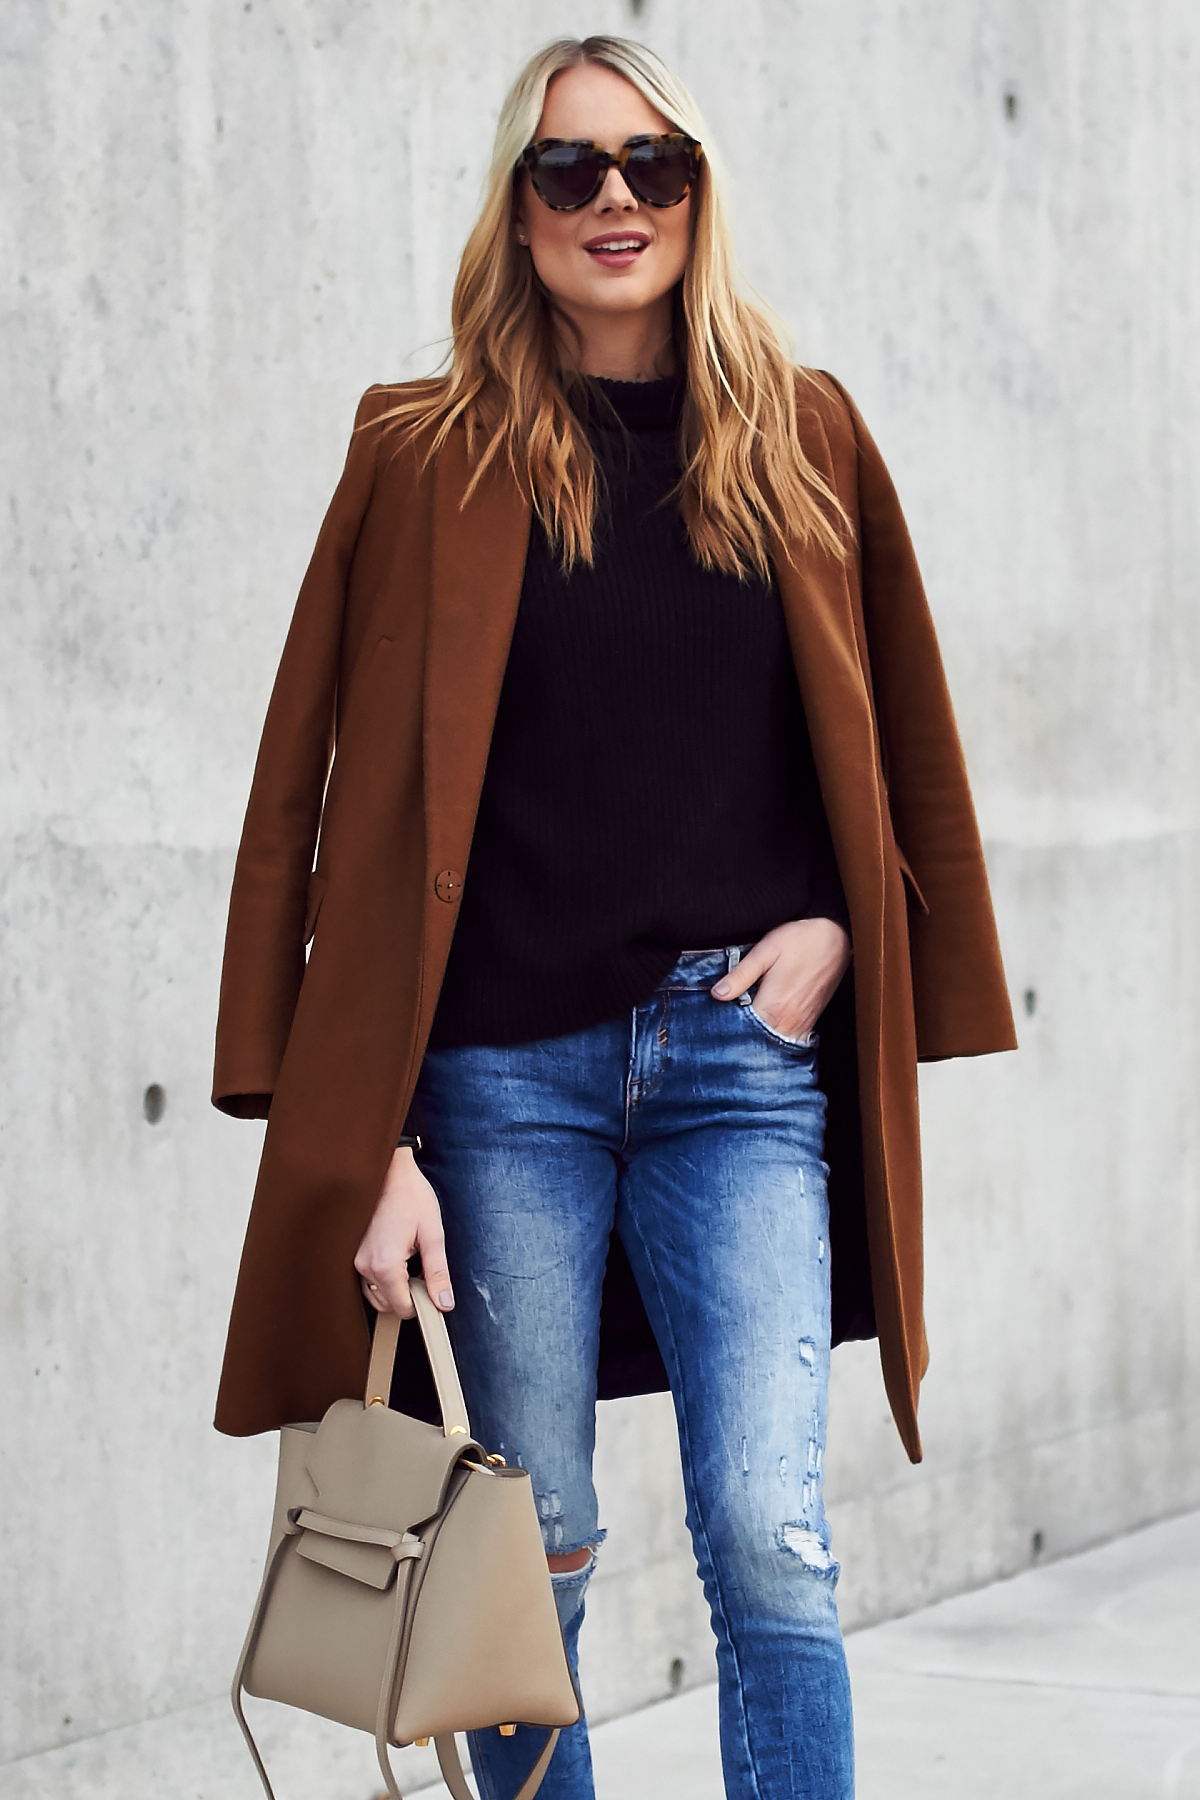 Fall Outfit, Winter Outfit, Tan Topcoat, Black Sweater, Denim Ripped Skinny Jeans, Celine Tie Belt Bag